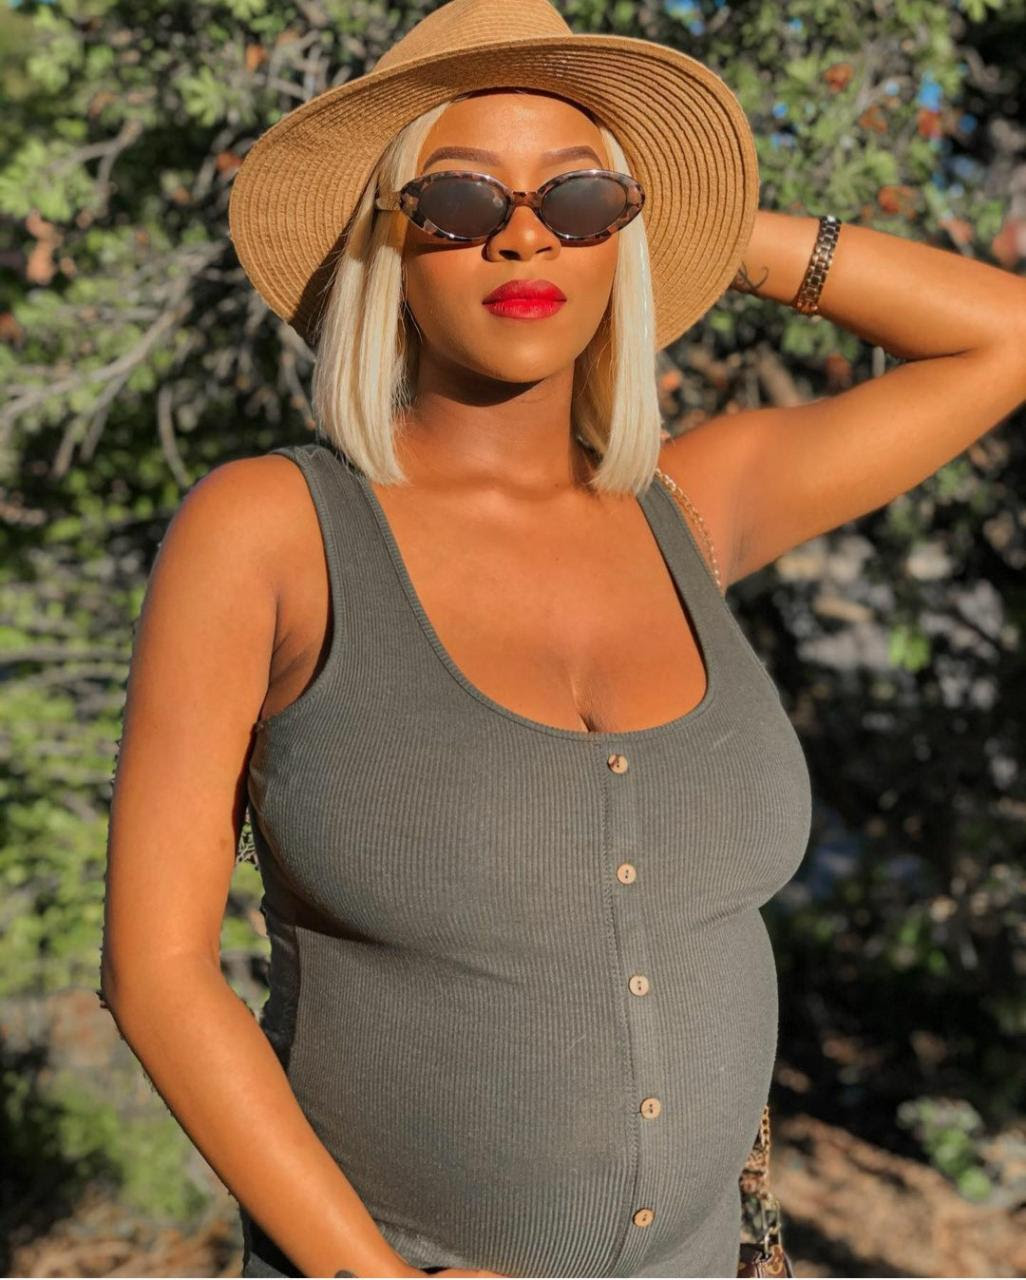 Congratulations pour in as The Boob Movement founder Abbey Zeus shares video of her baby bump (video)